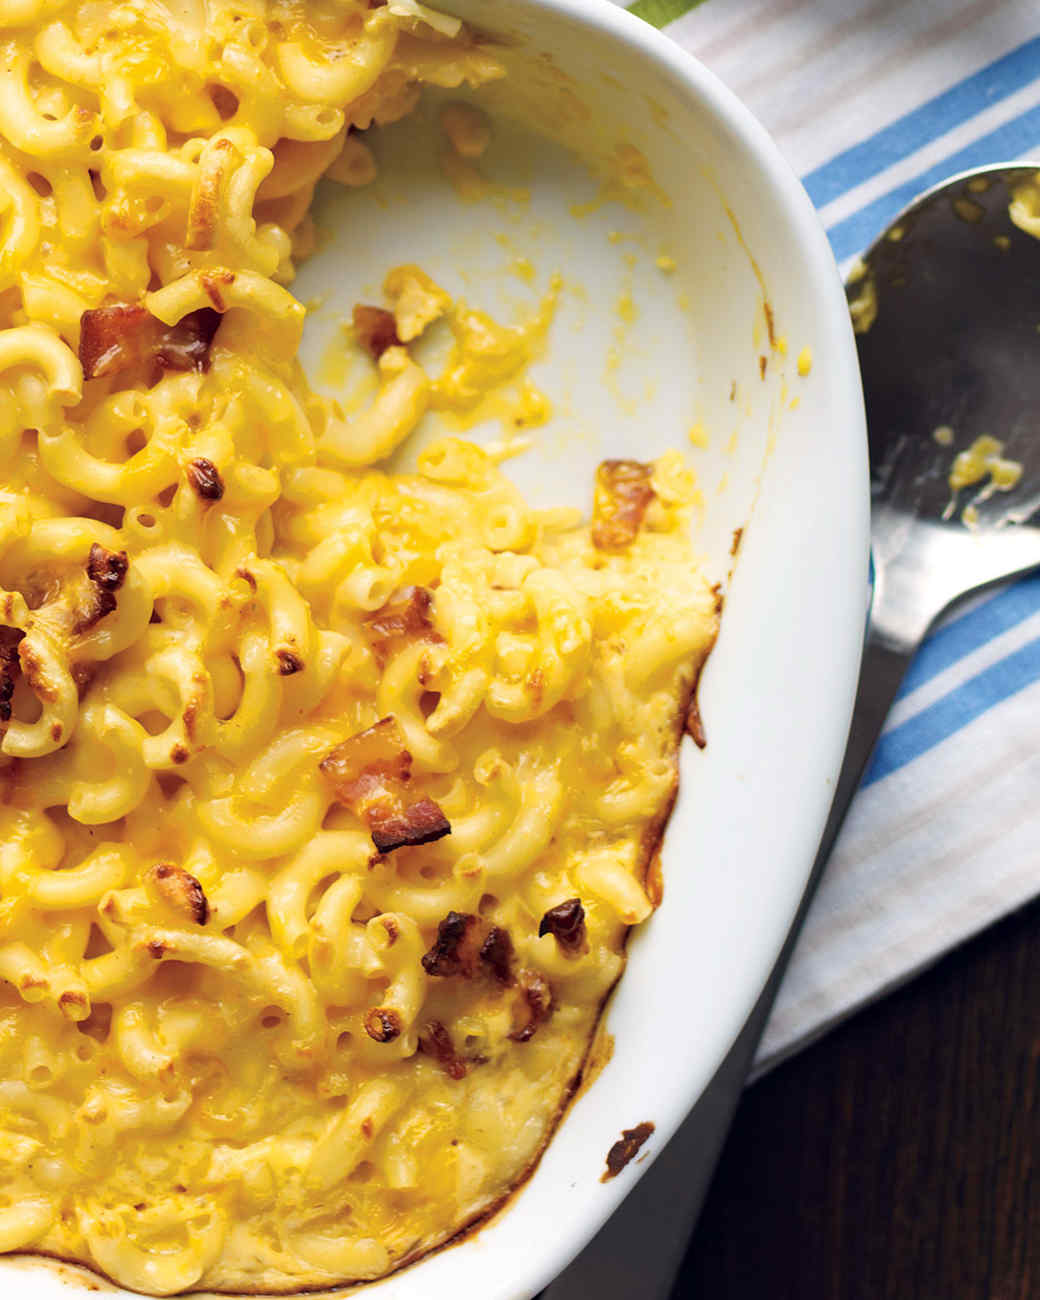 baked mac and cheese recipe no roux